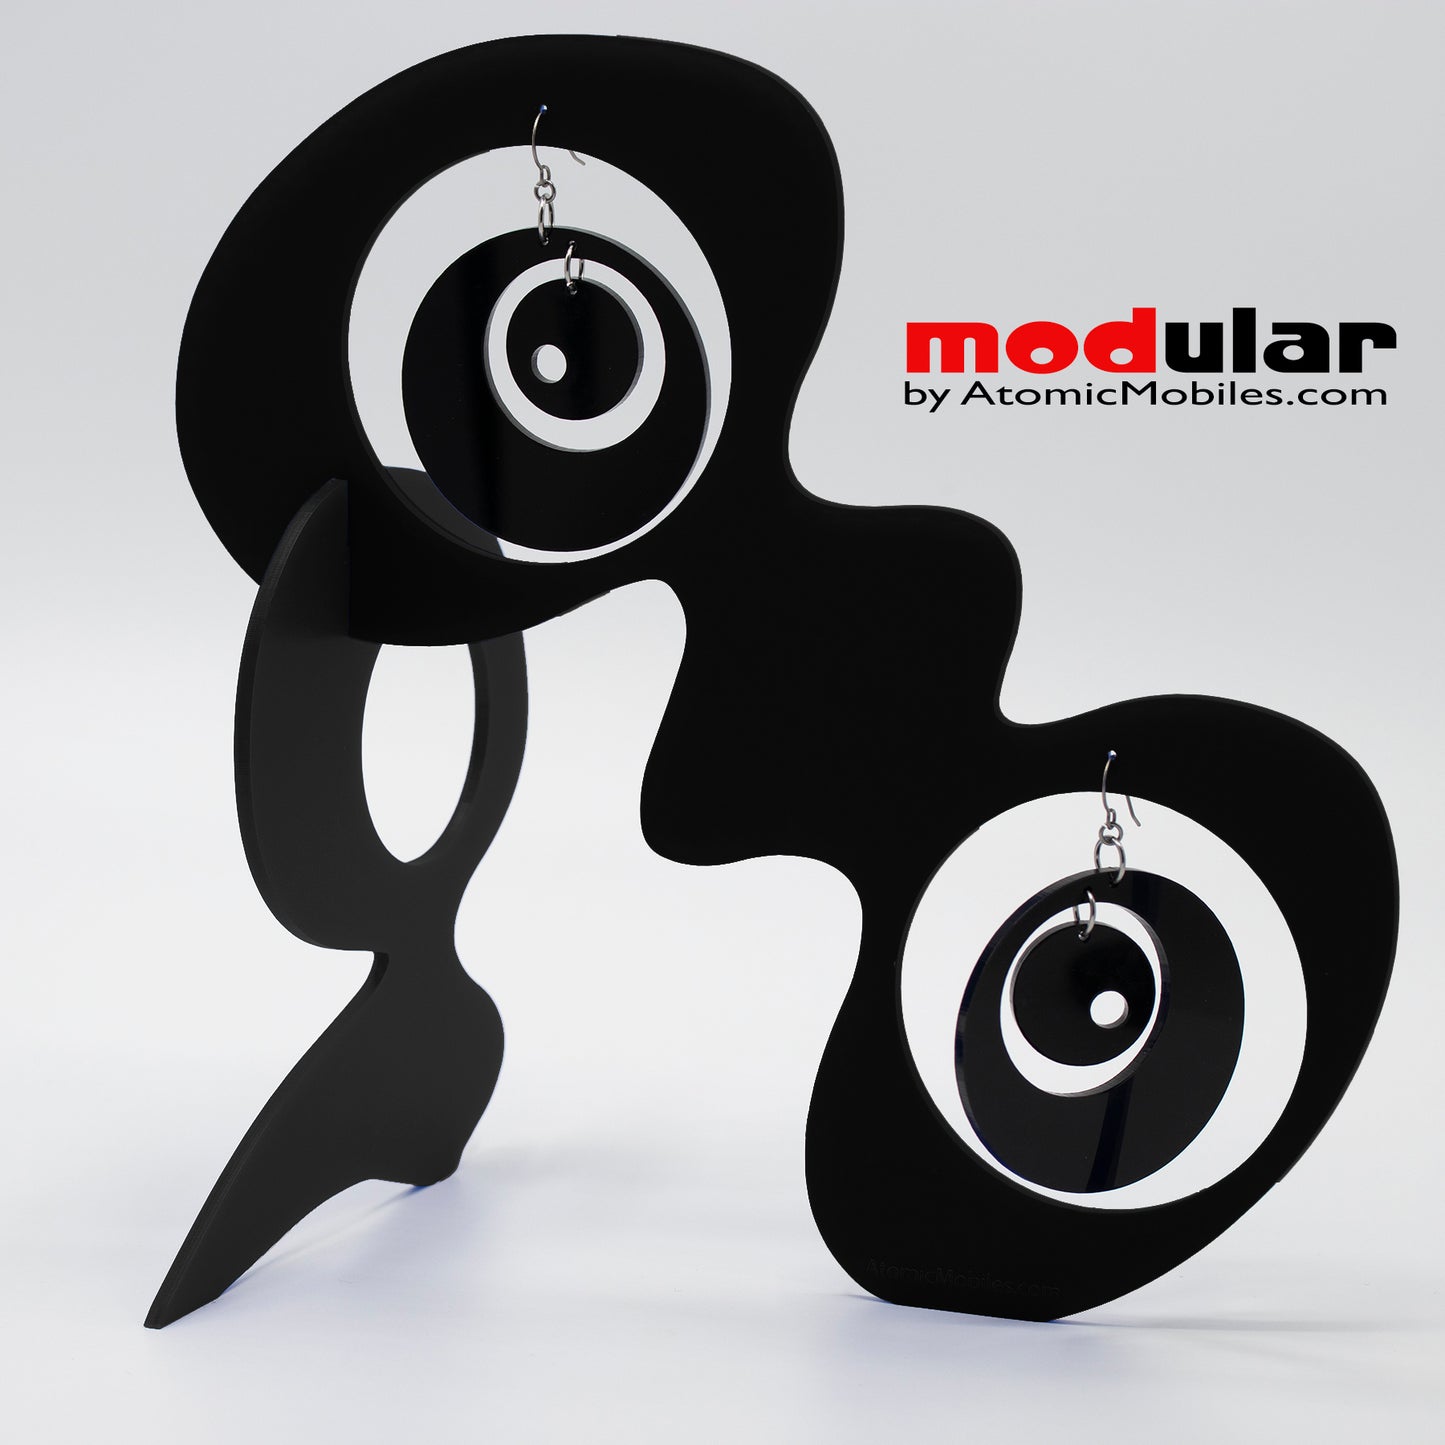 Handmade Groovy style earrings and stabile kinetic modern art sculpture in Black by AtomicMobiles.com